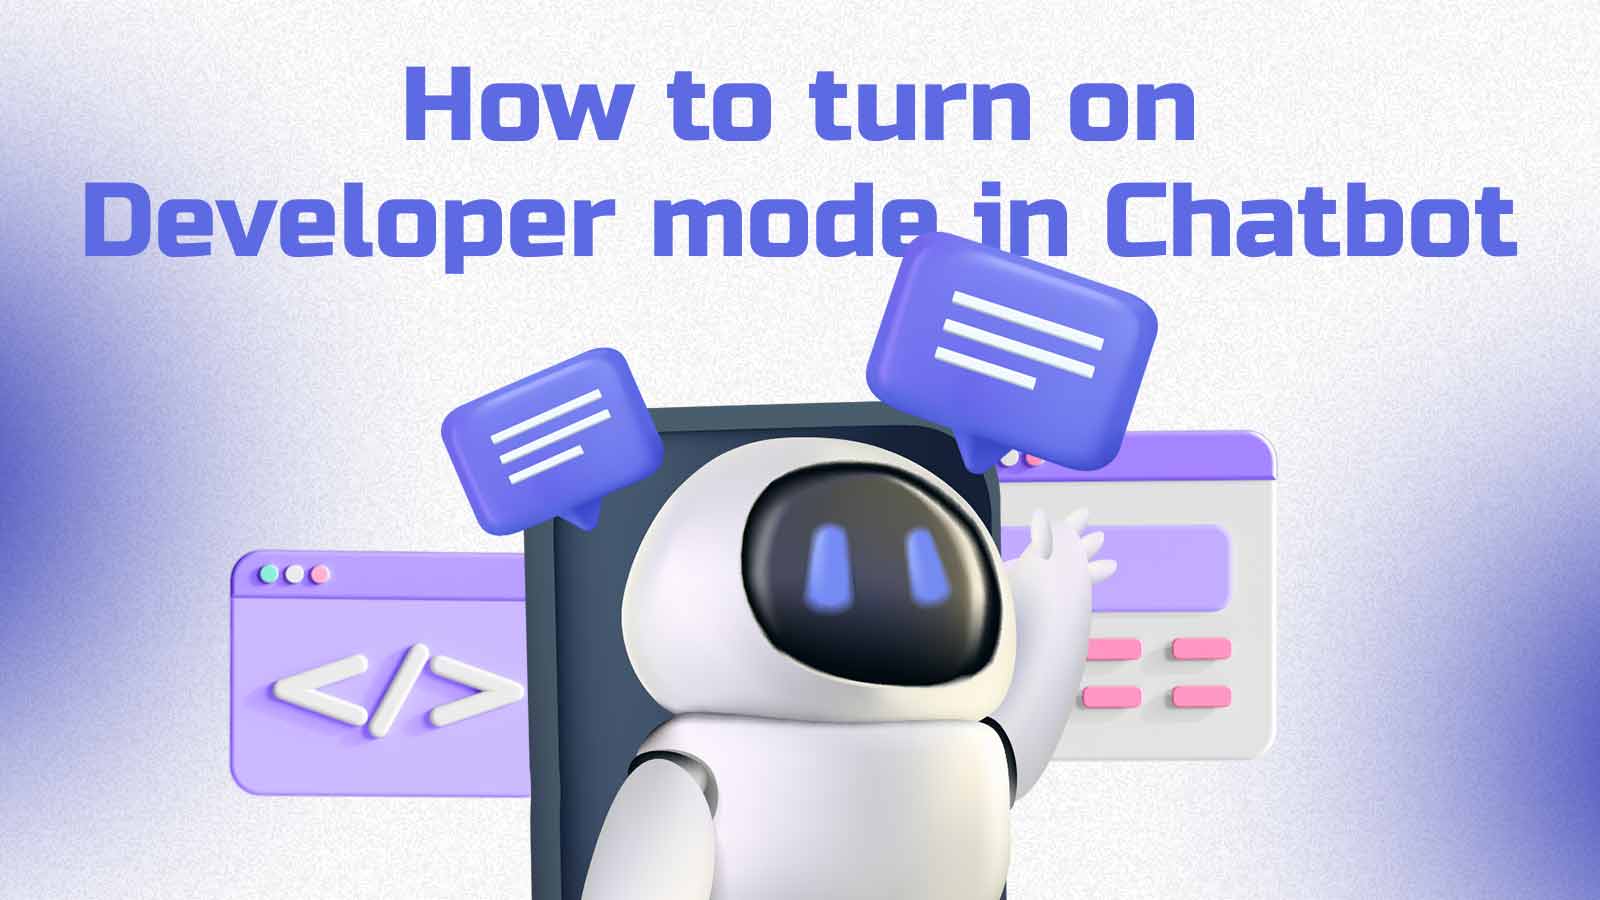 How To Turn On Developer Mode In Chatbot? Detailed Steps